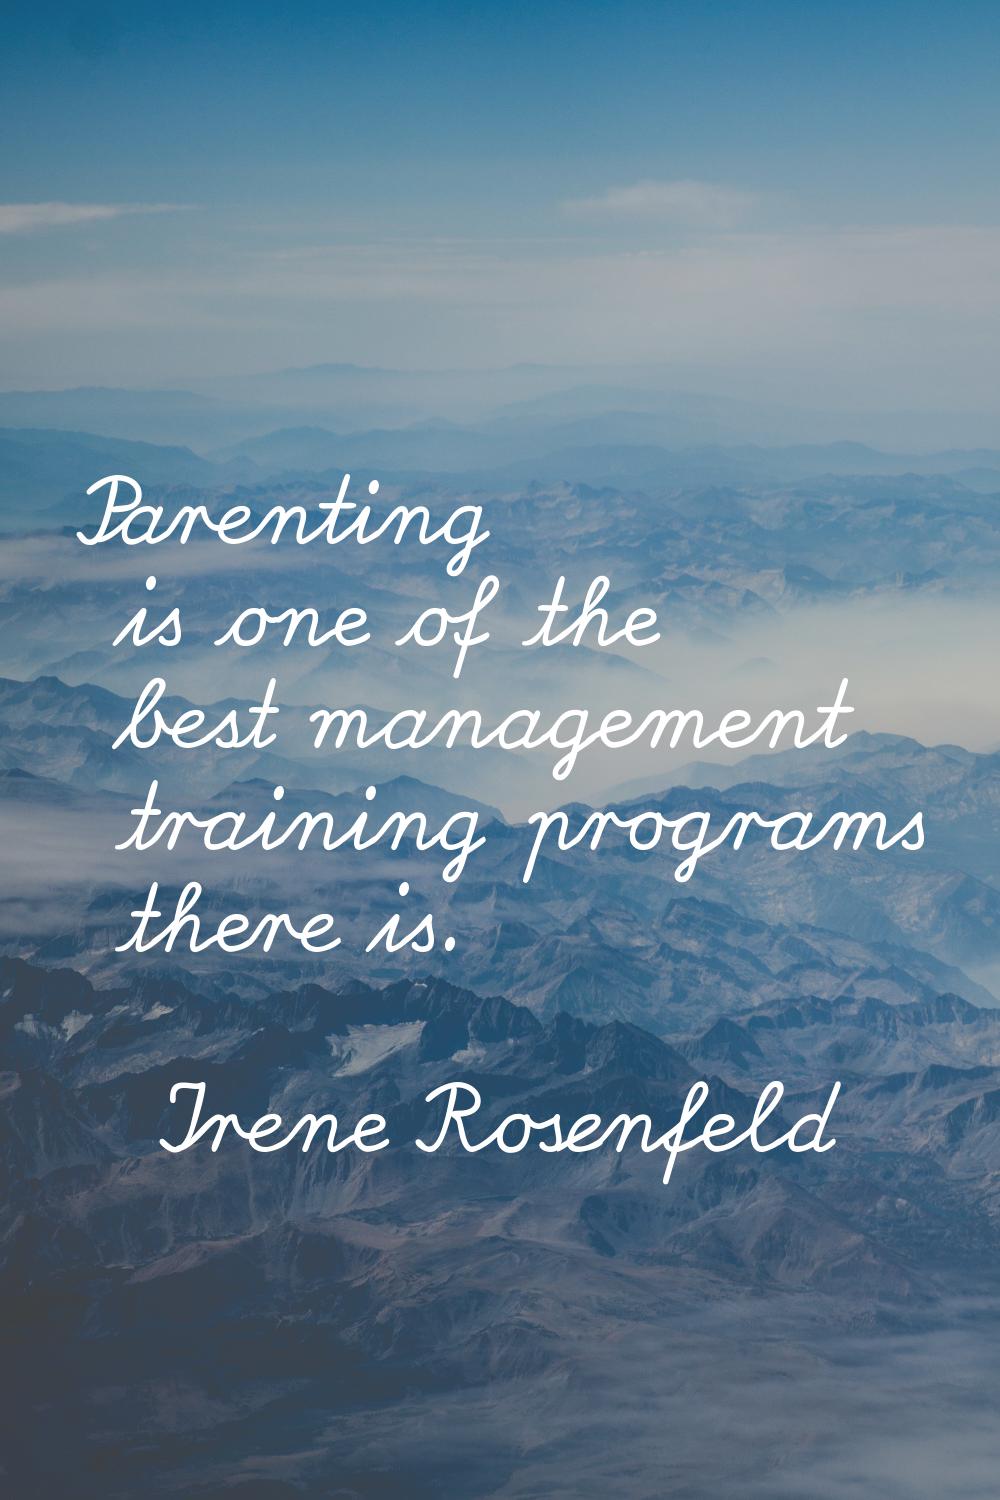 Parenting is one of the best management training programs there is.